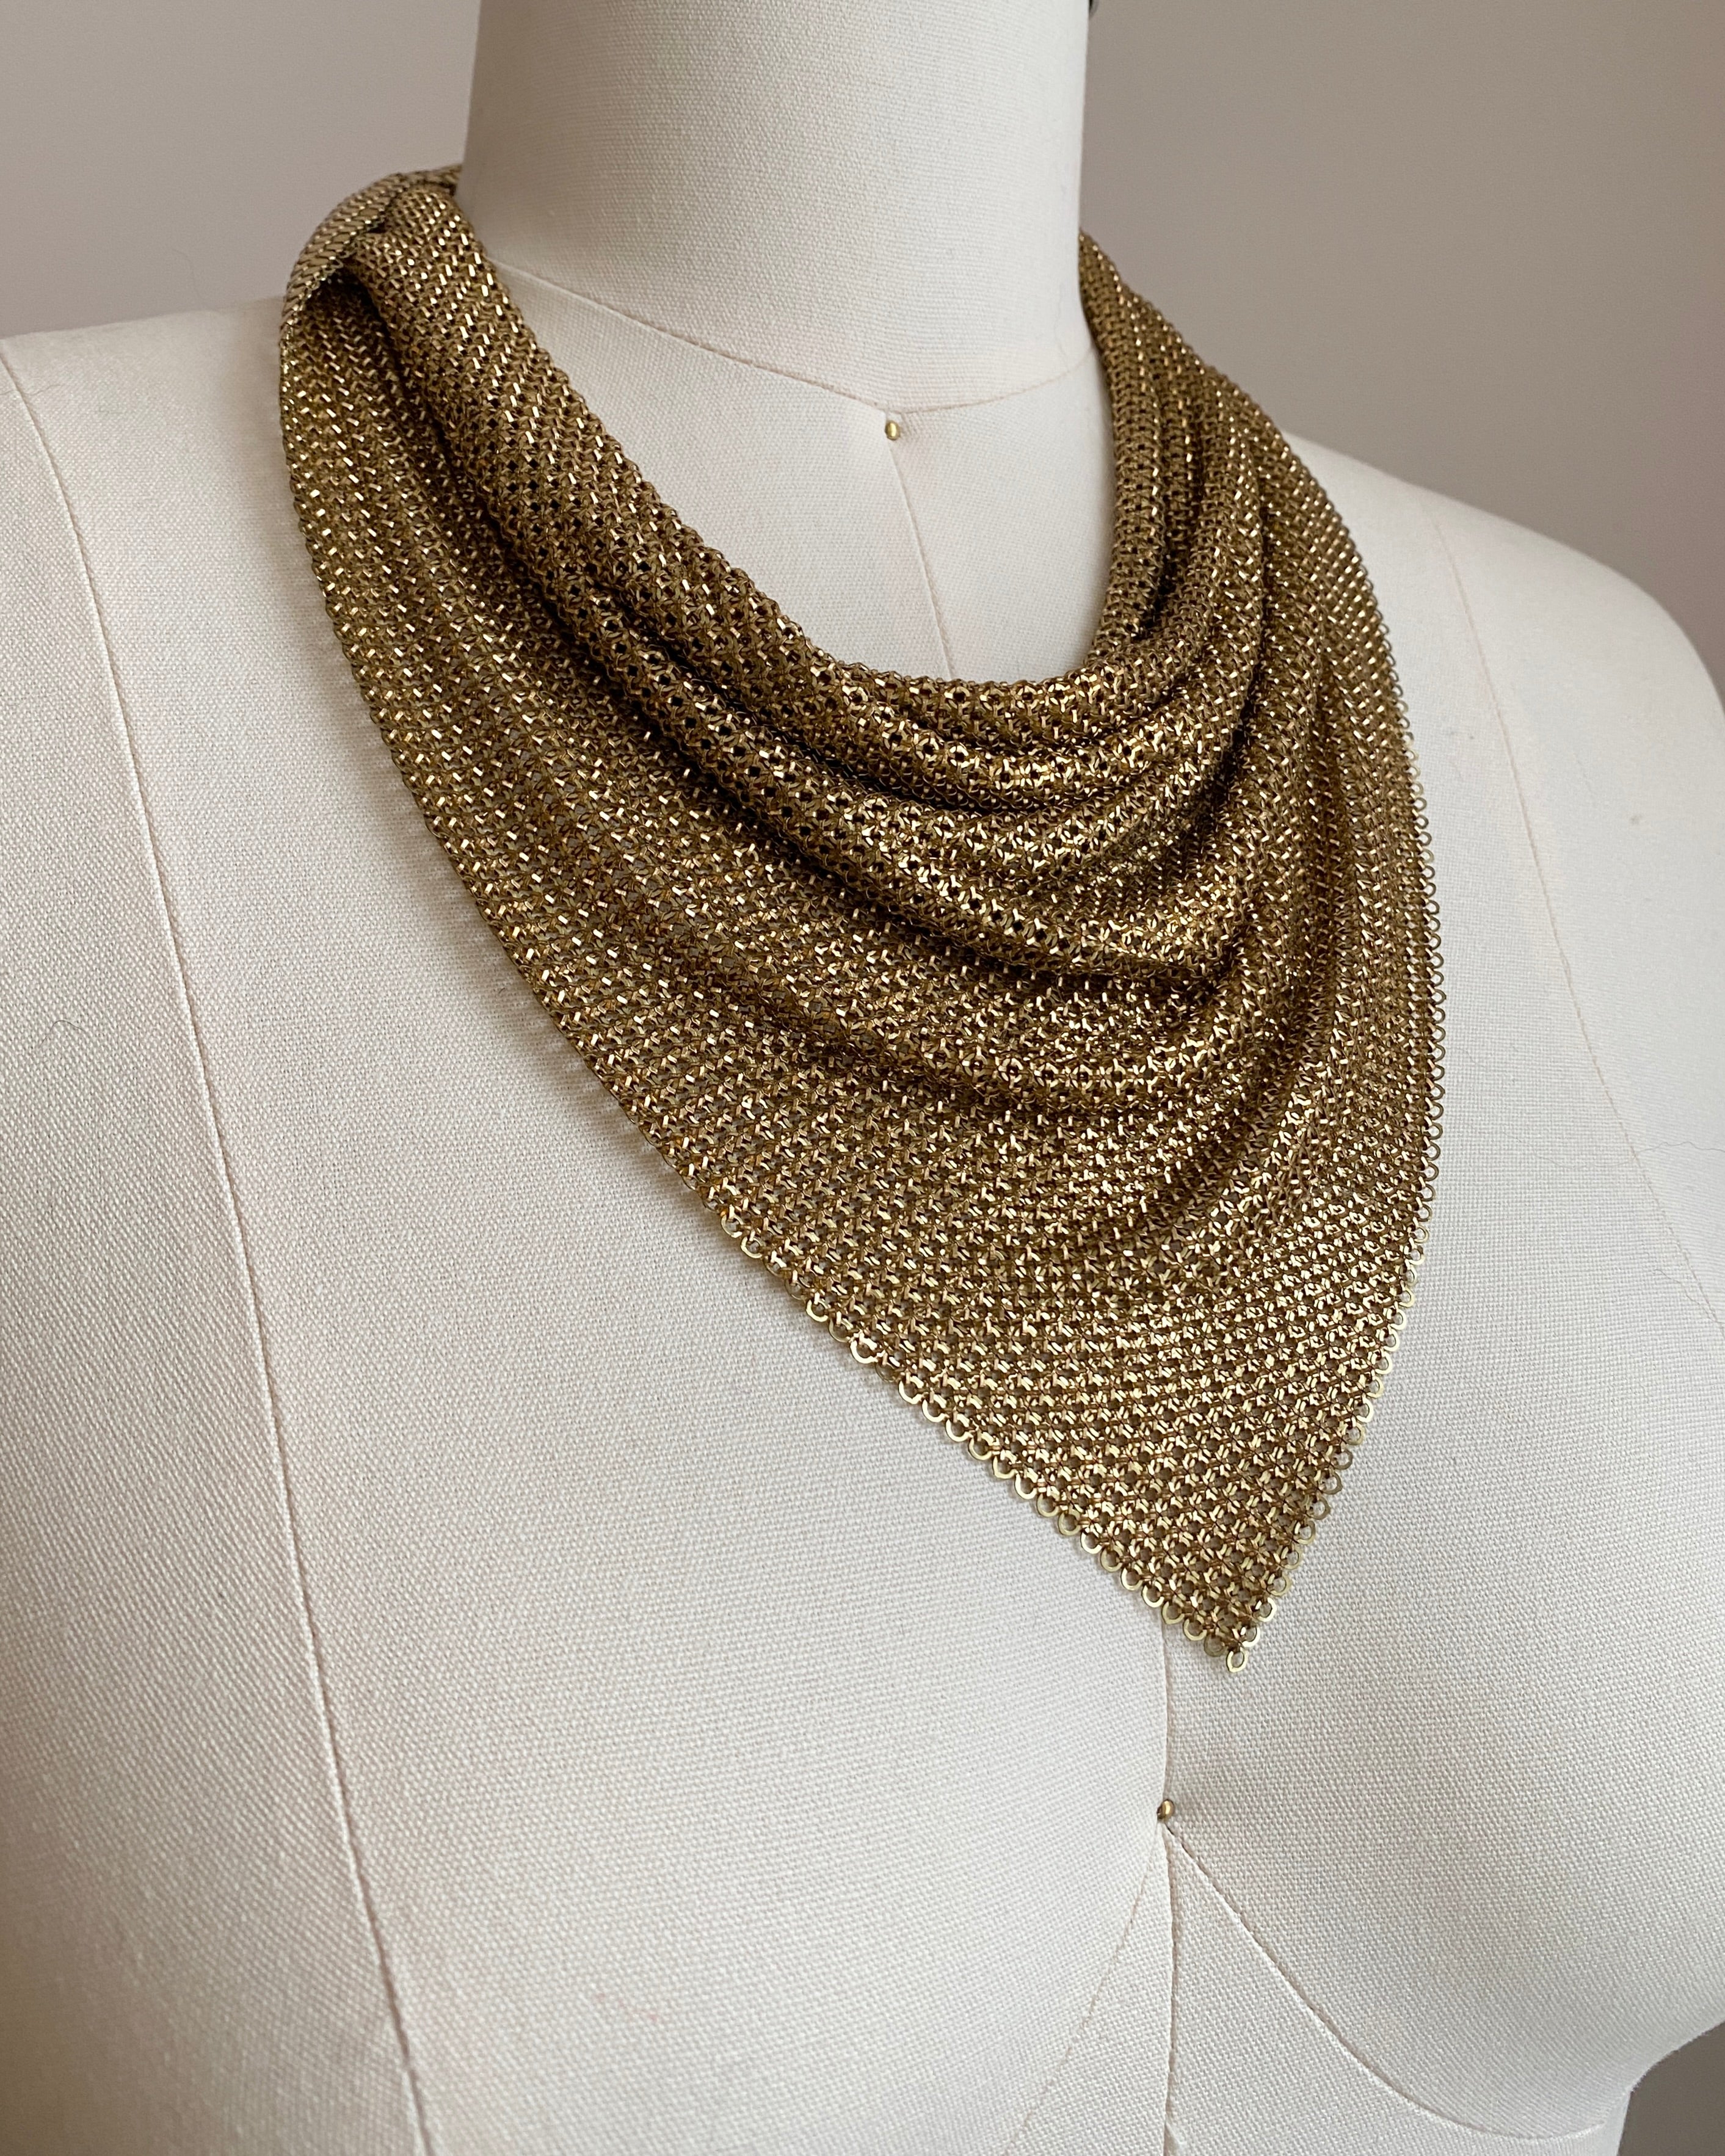 Vintage 1950s Whiting and Davis Gold Mesh Chain Mail Scarf Necklace